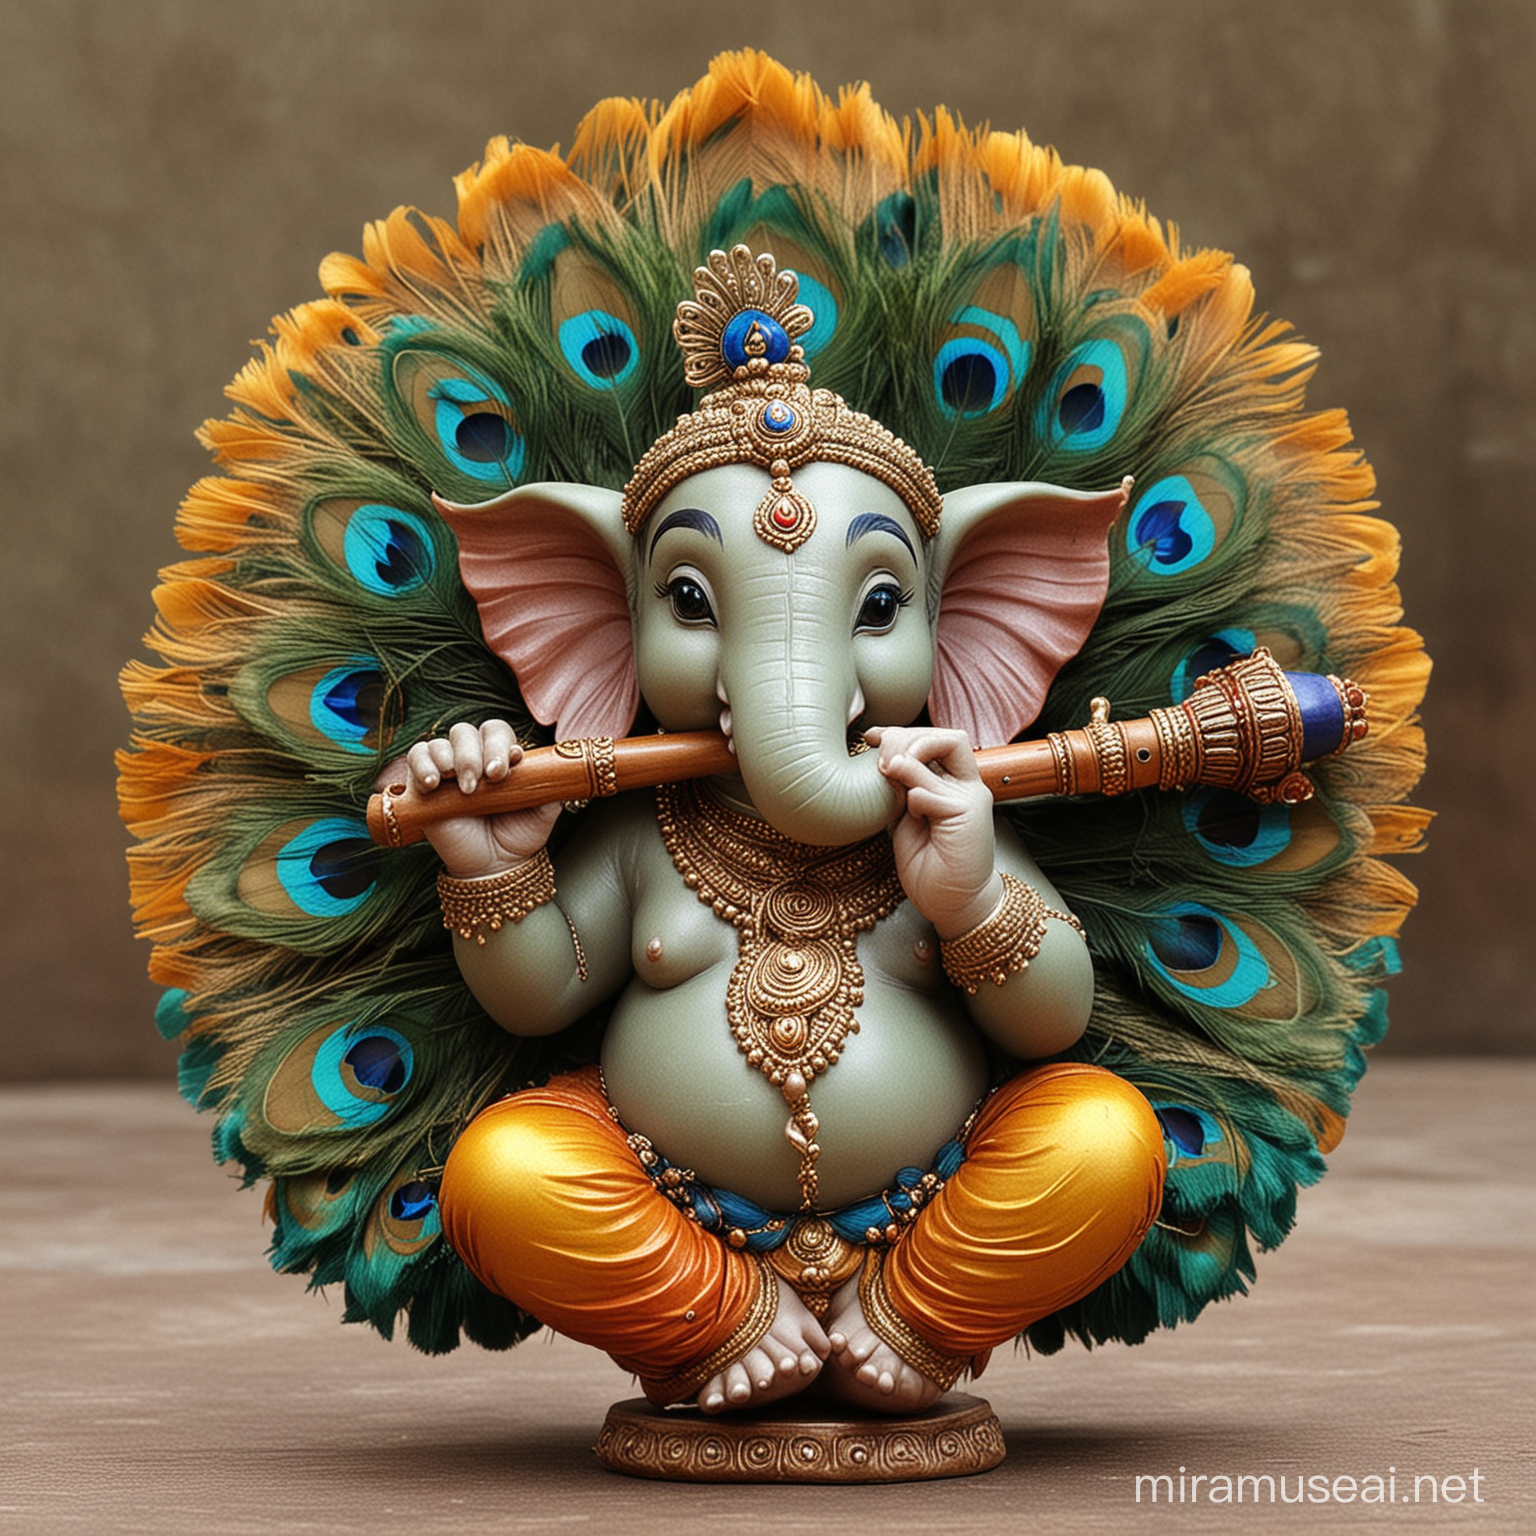 Adorable Ganesh Playing Bansuri with Peacock Feather Adorned Head